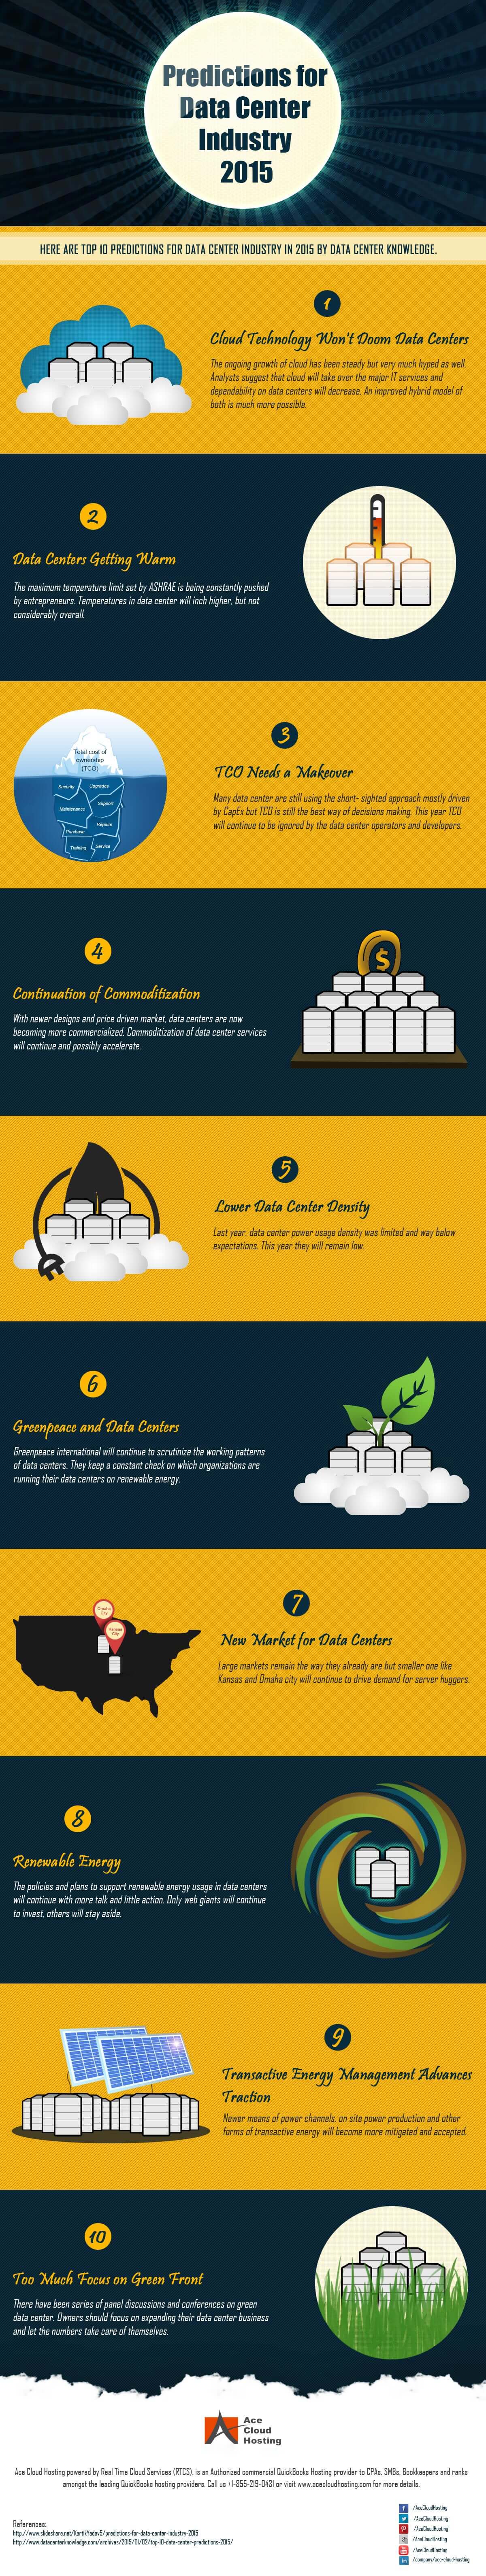 Predictions for Data Center Industry 2015 Infographic